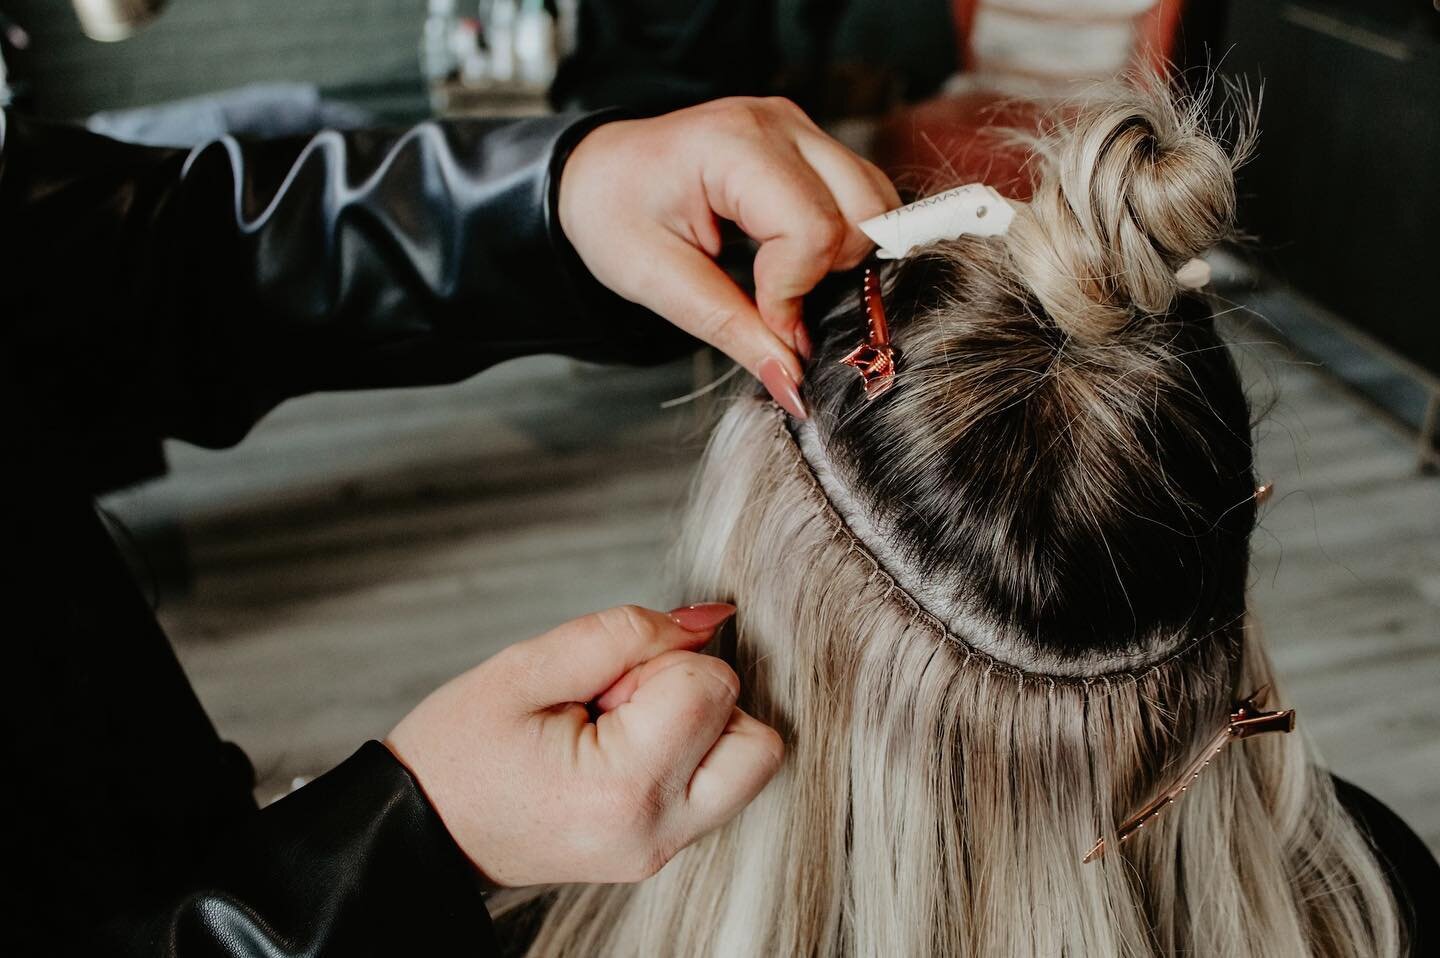 Courtney is one of our Certified Extension Experts here at M&amp;Co. While offering multiple different techniques of hair additions, Courtney will provide a detailed consultation on how to properly care and style your new look✨
Contact @courtney_irzy